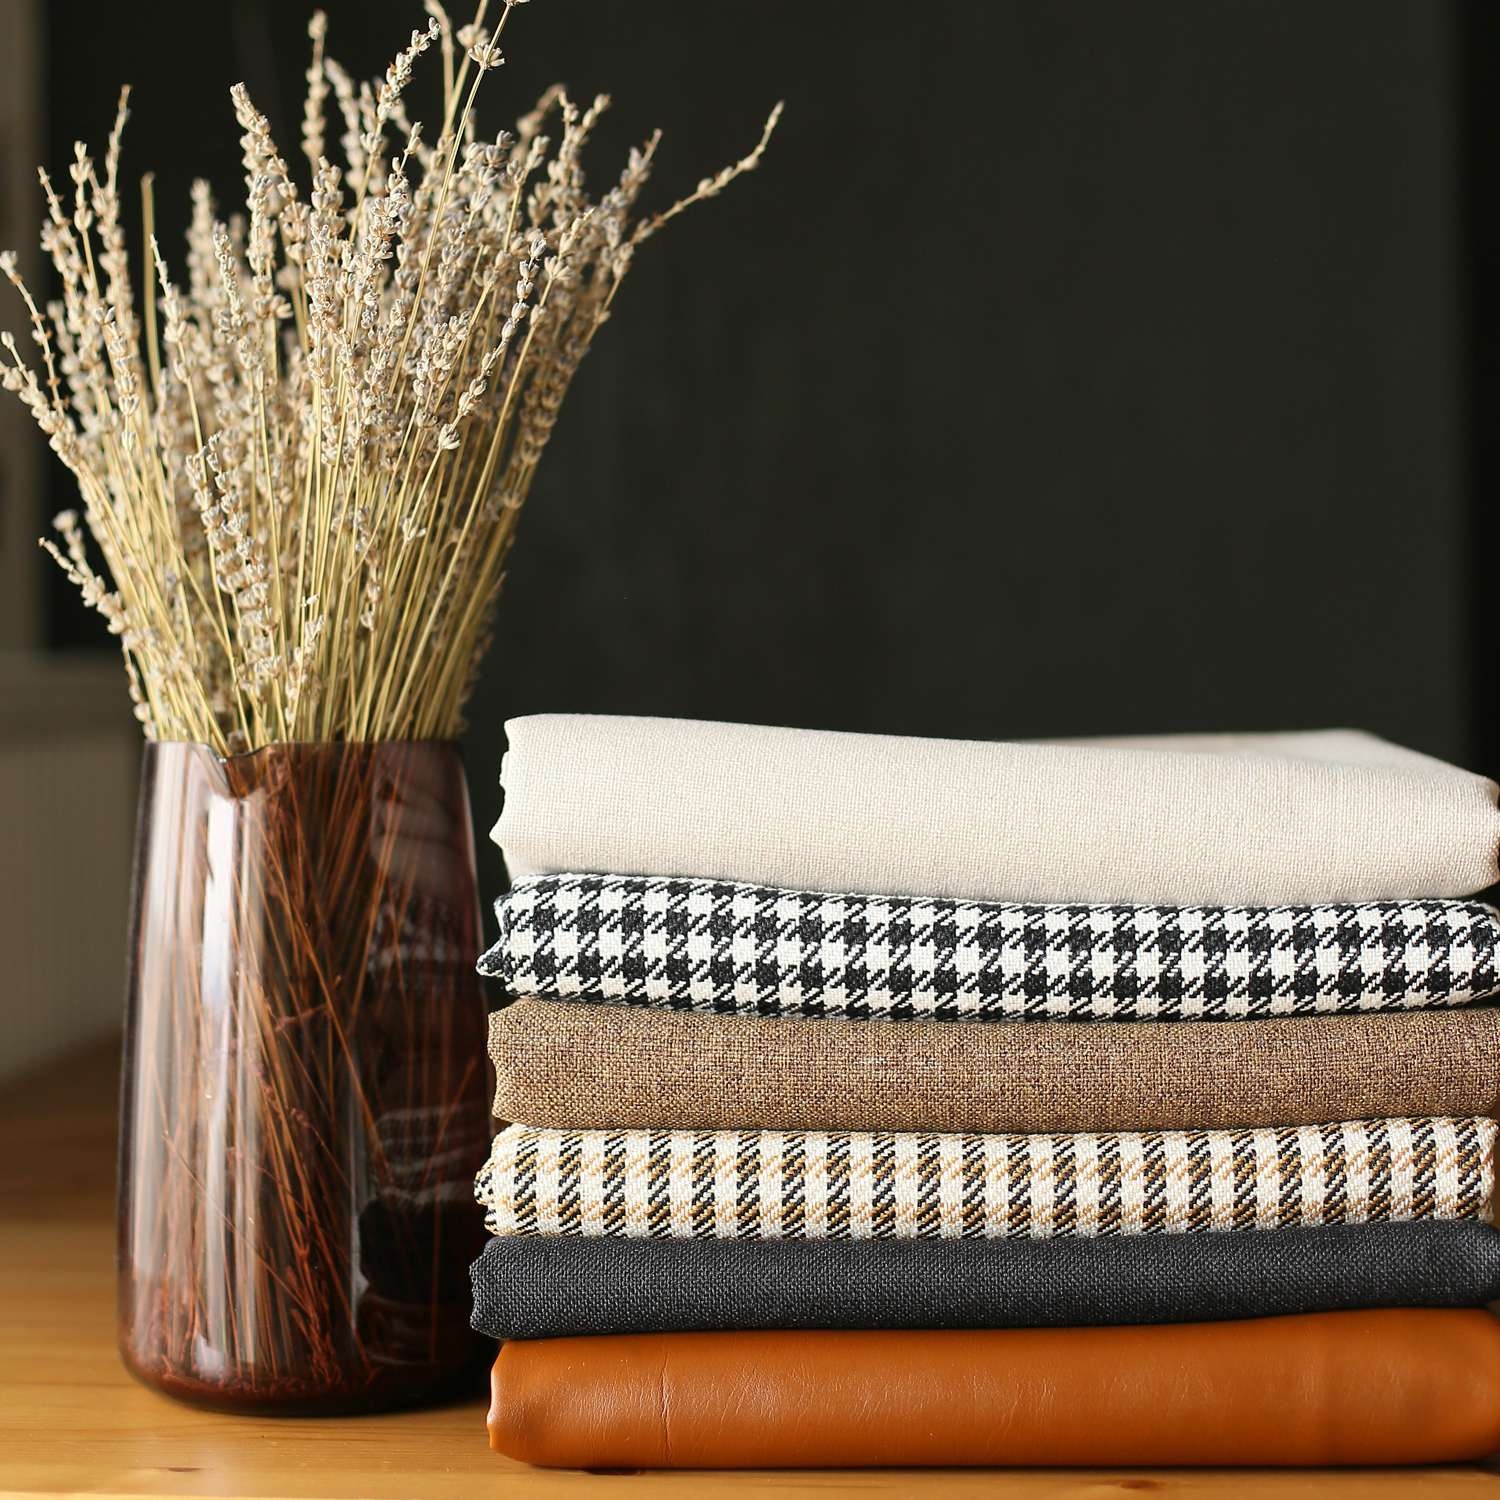 Set of 4 Houndstooth Brown Faux Leather Pillow Covers